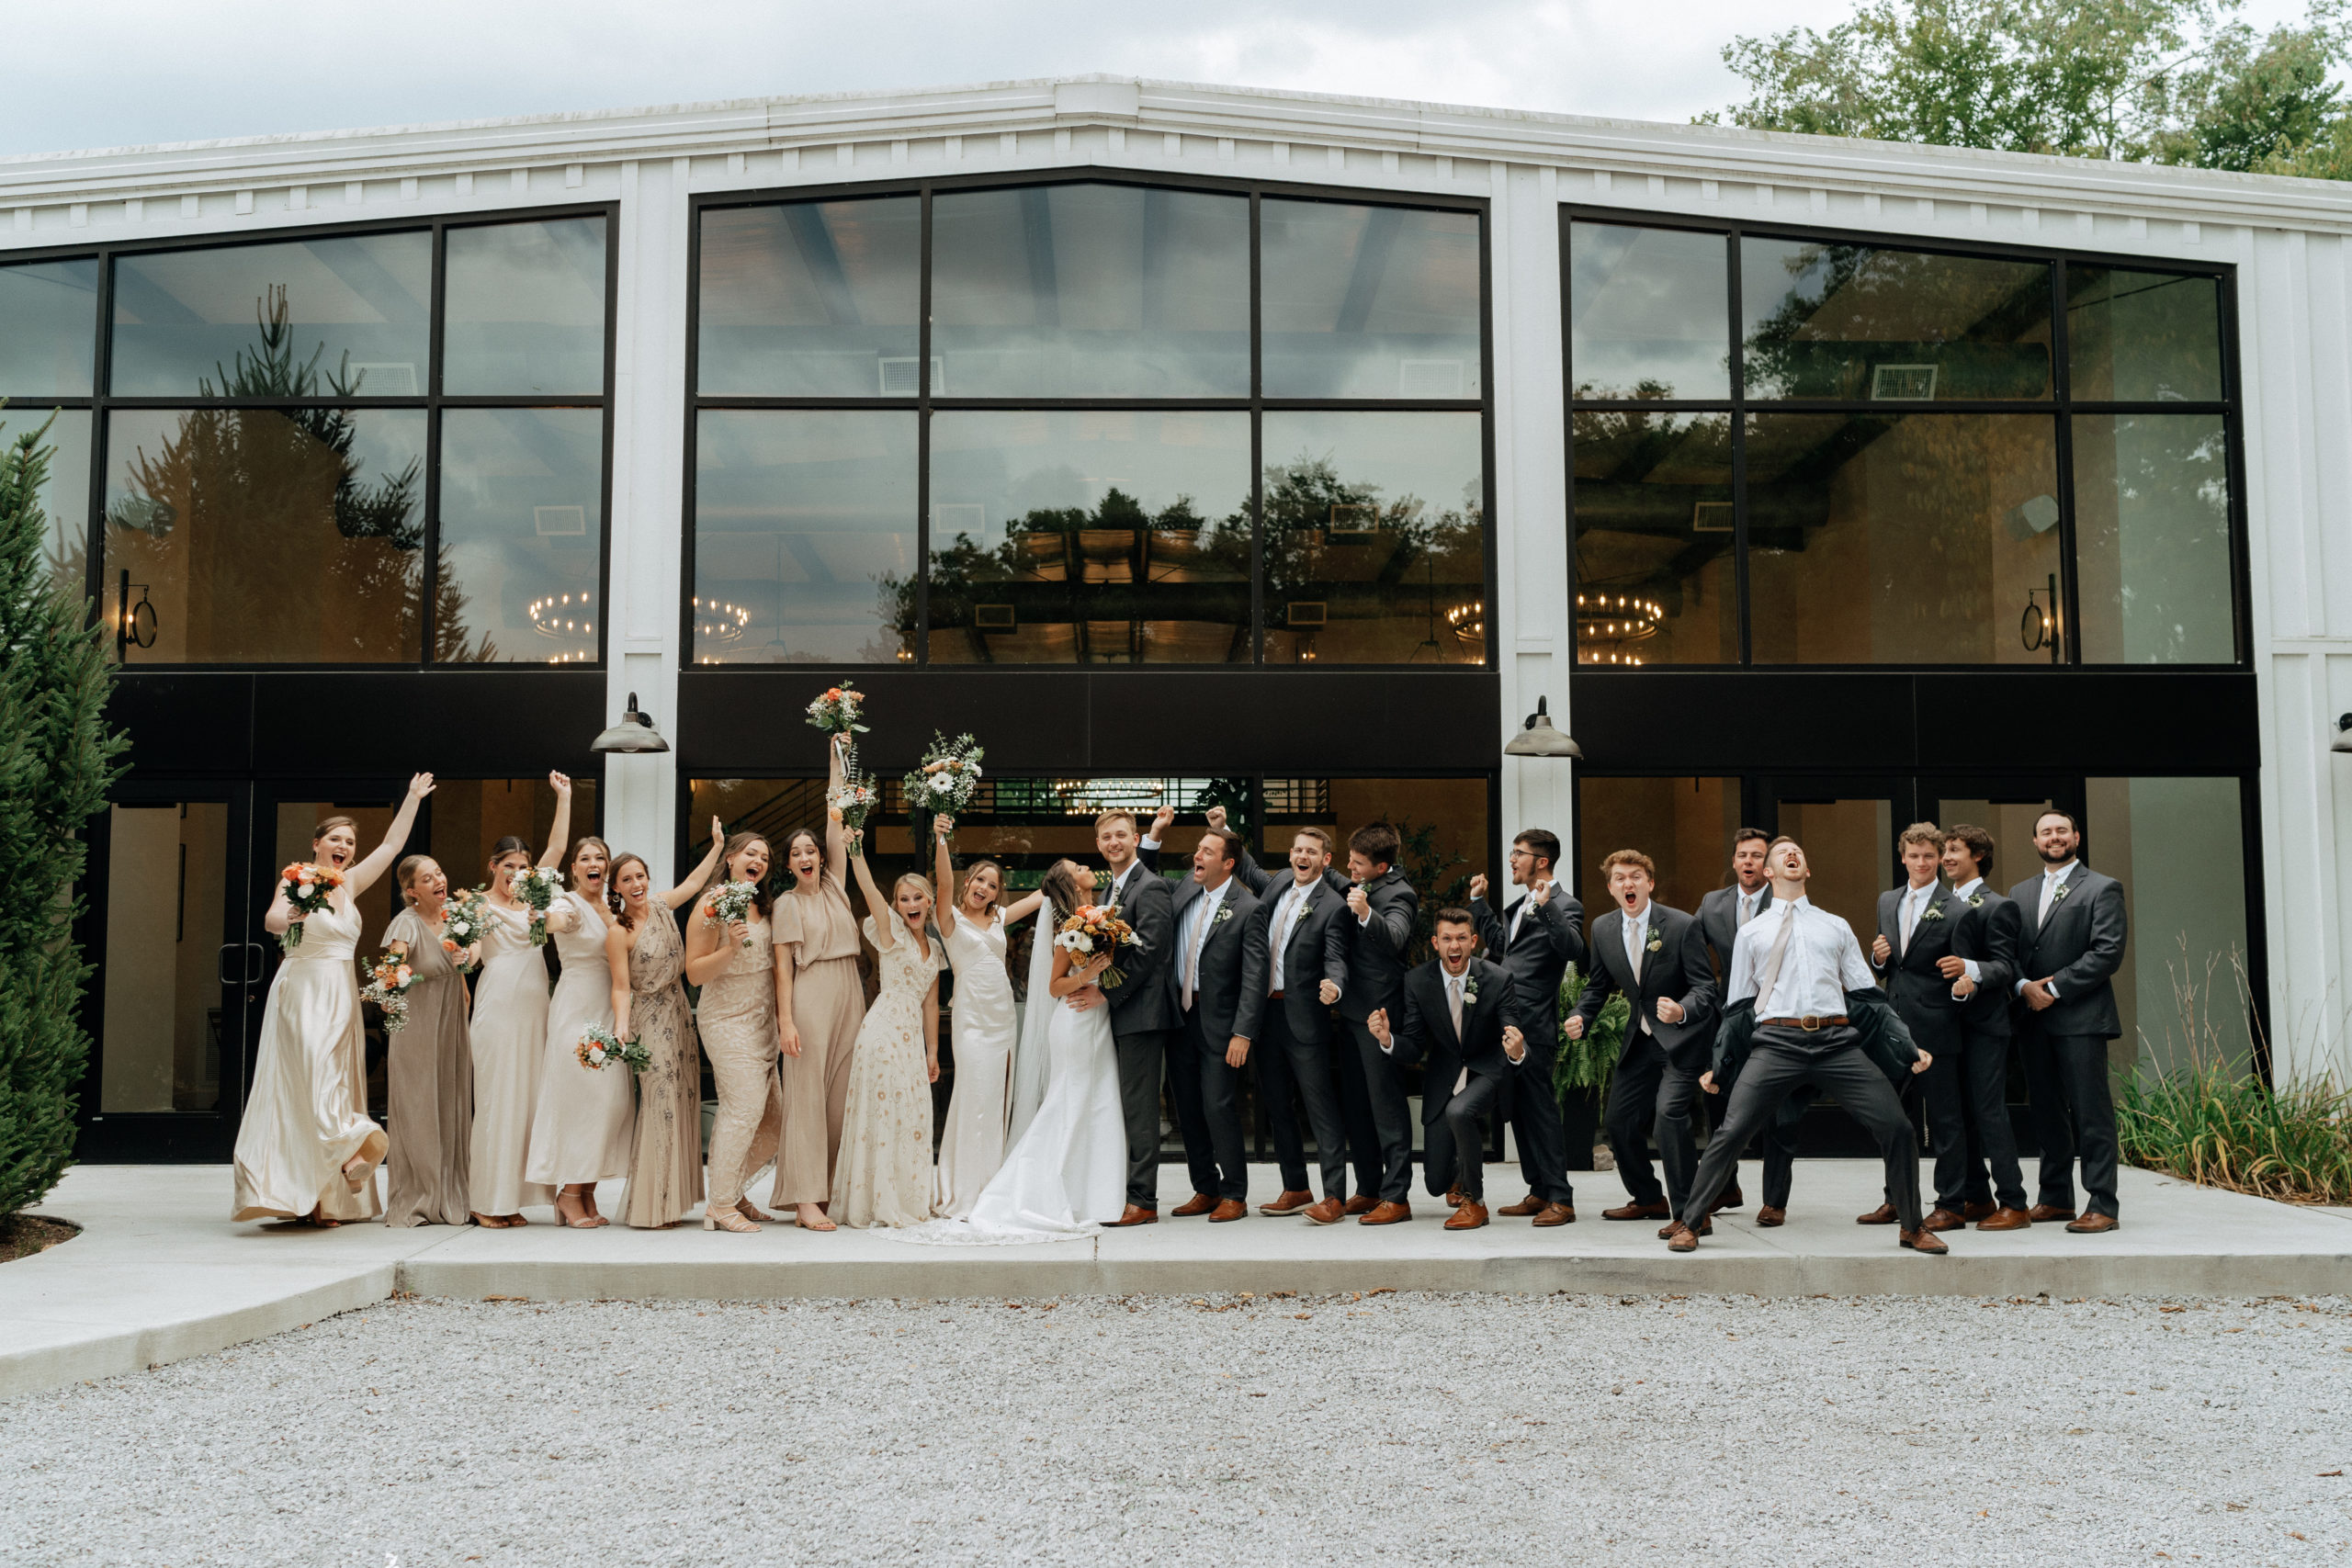 Bridal party excited on their wedding day!